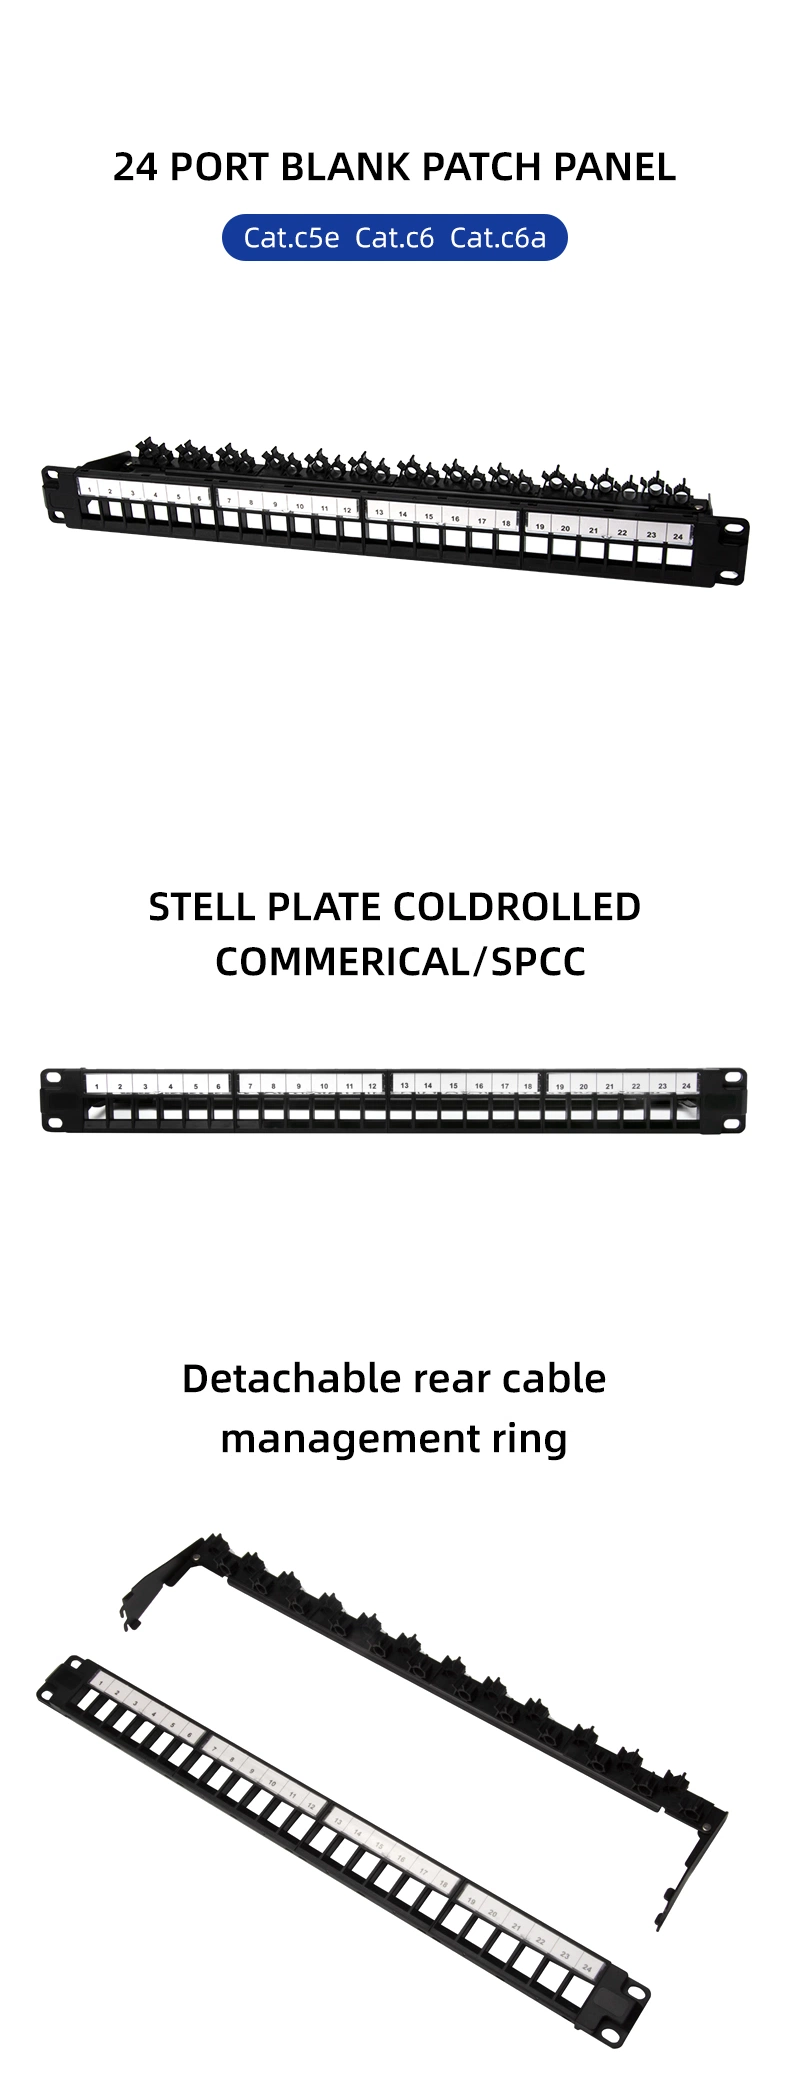 FTP STP 24 Port Blank Patch Panel with Dust Shutter